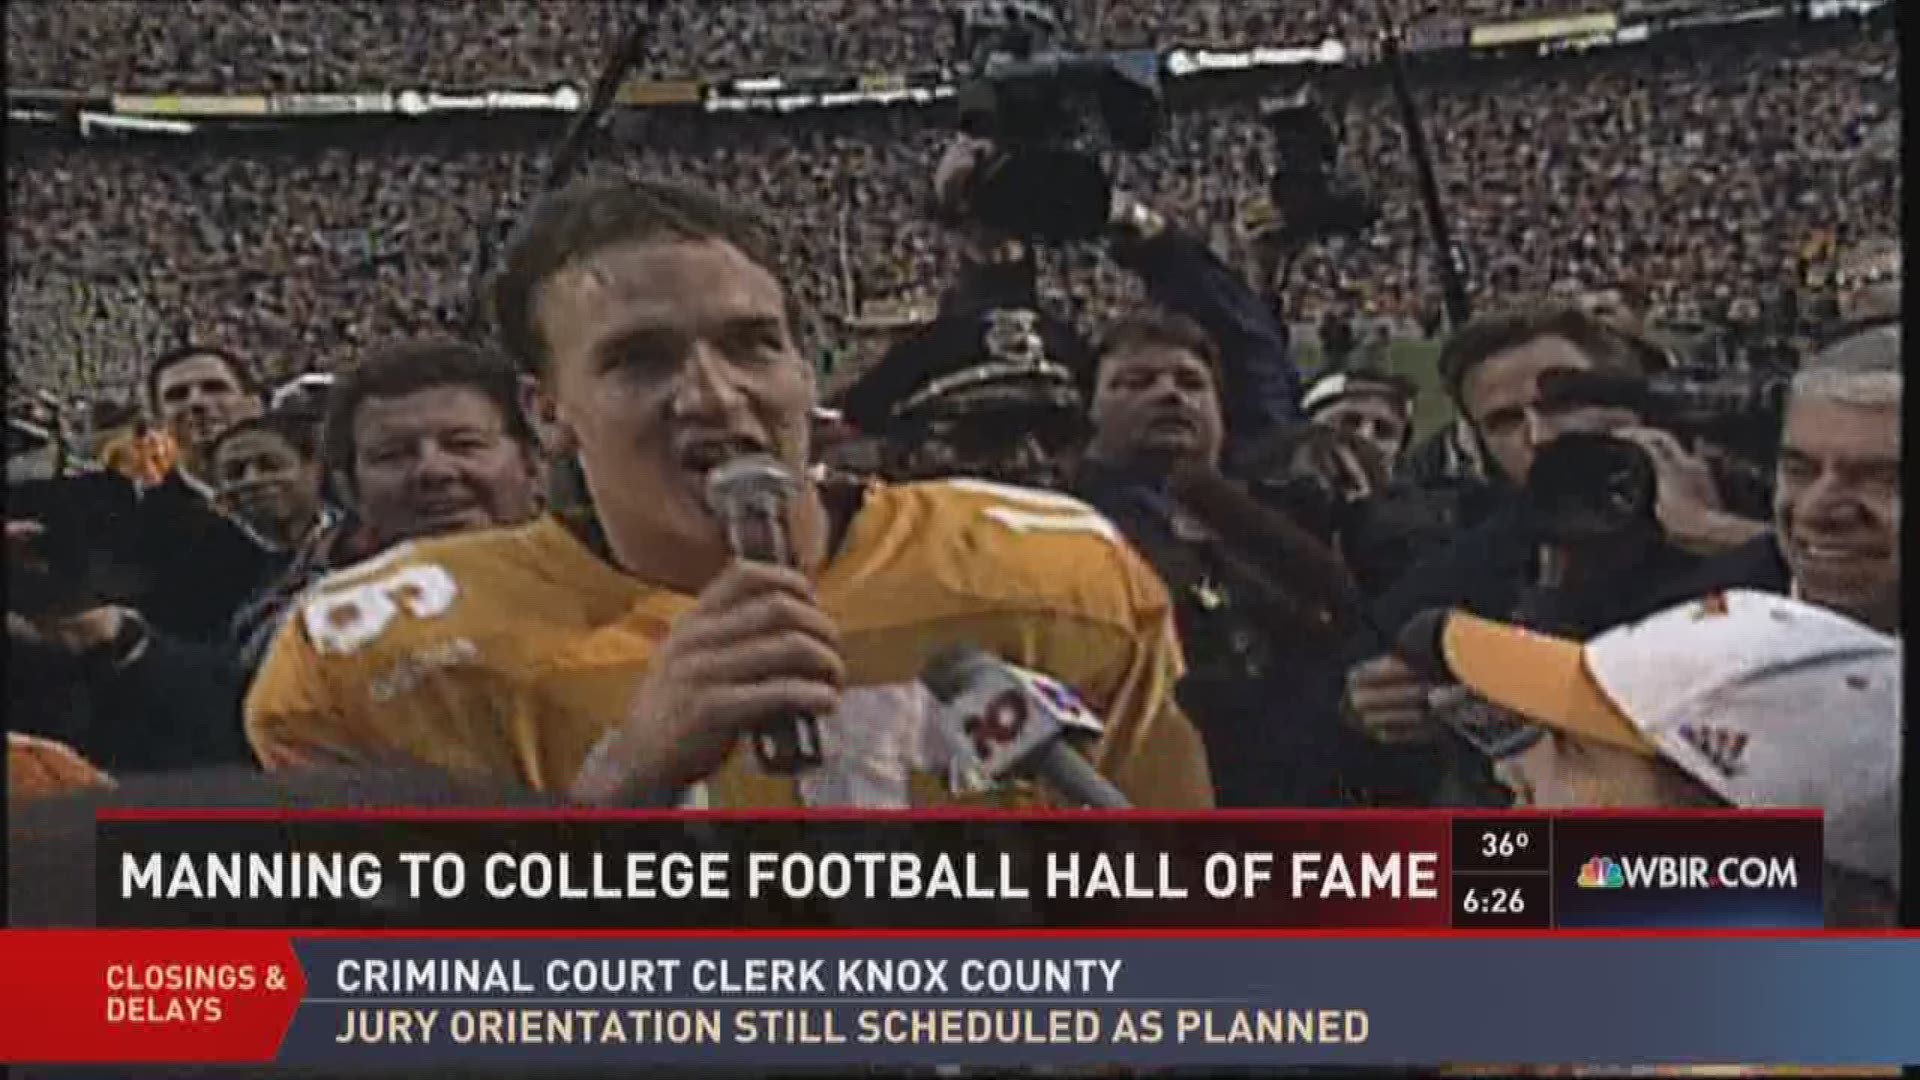 Jan. 9, 2017: Former Tennessee Vols quarterback Peyton Manning has been selected to the College Football Hall of Fame.